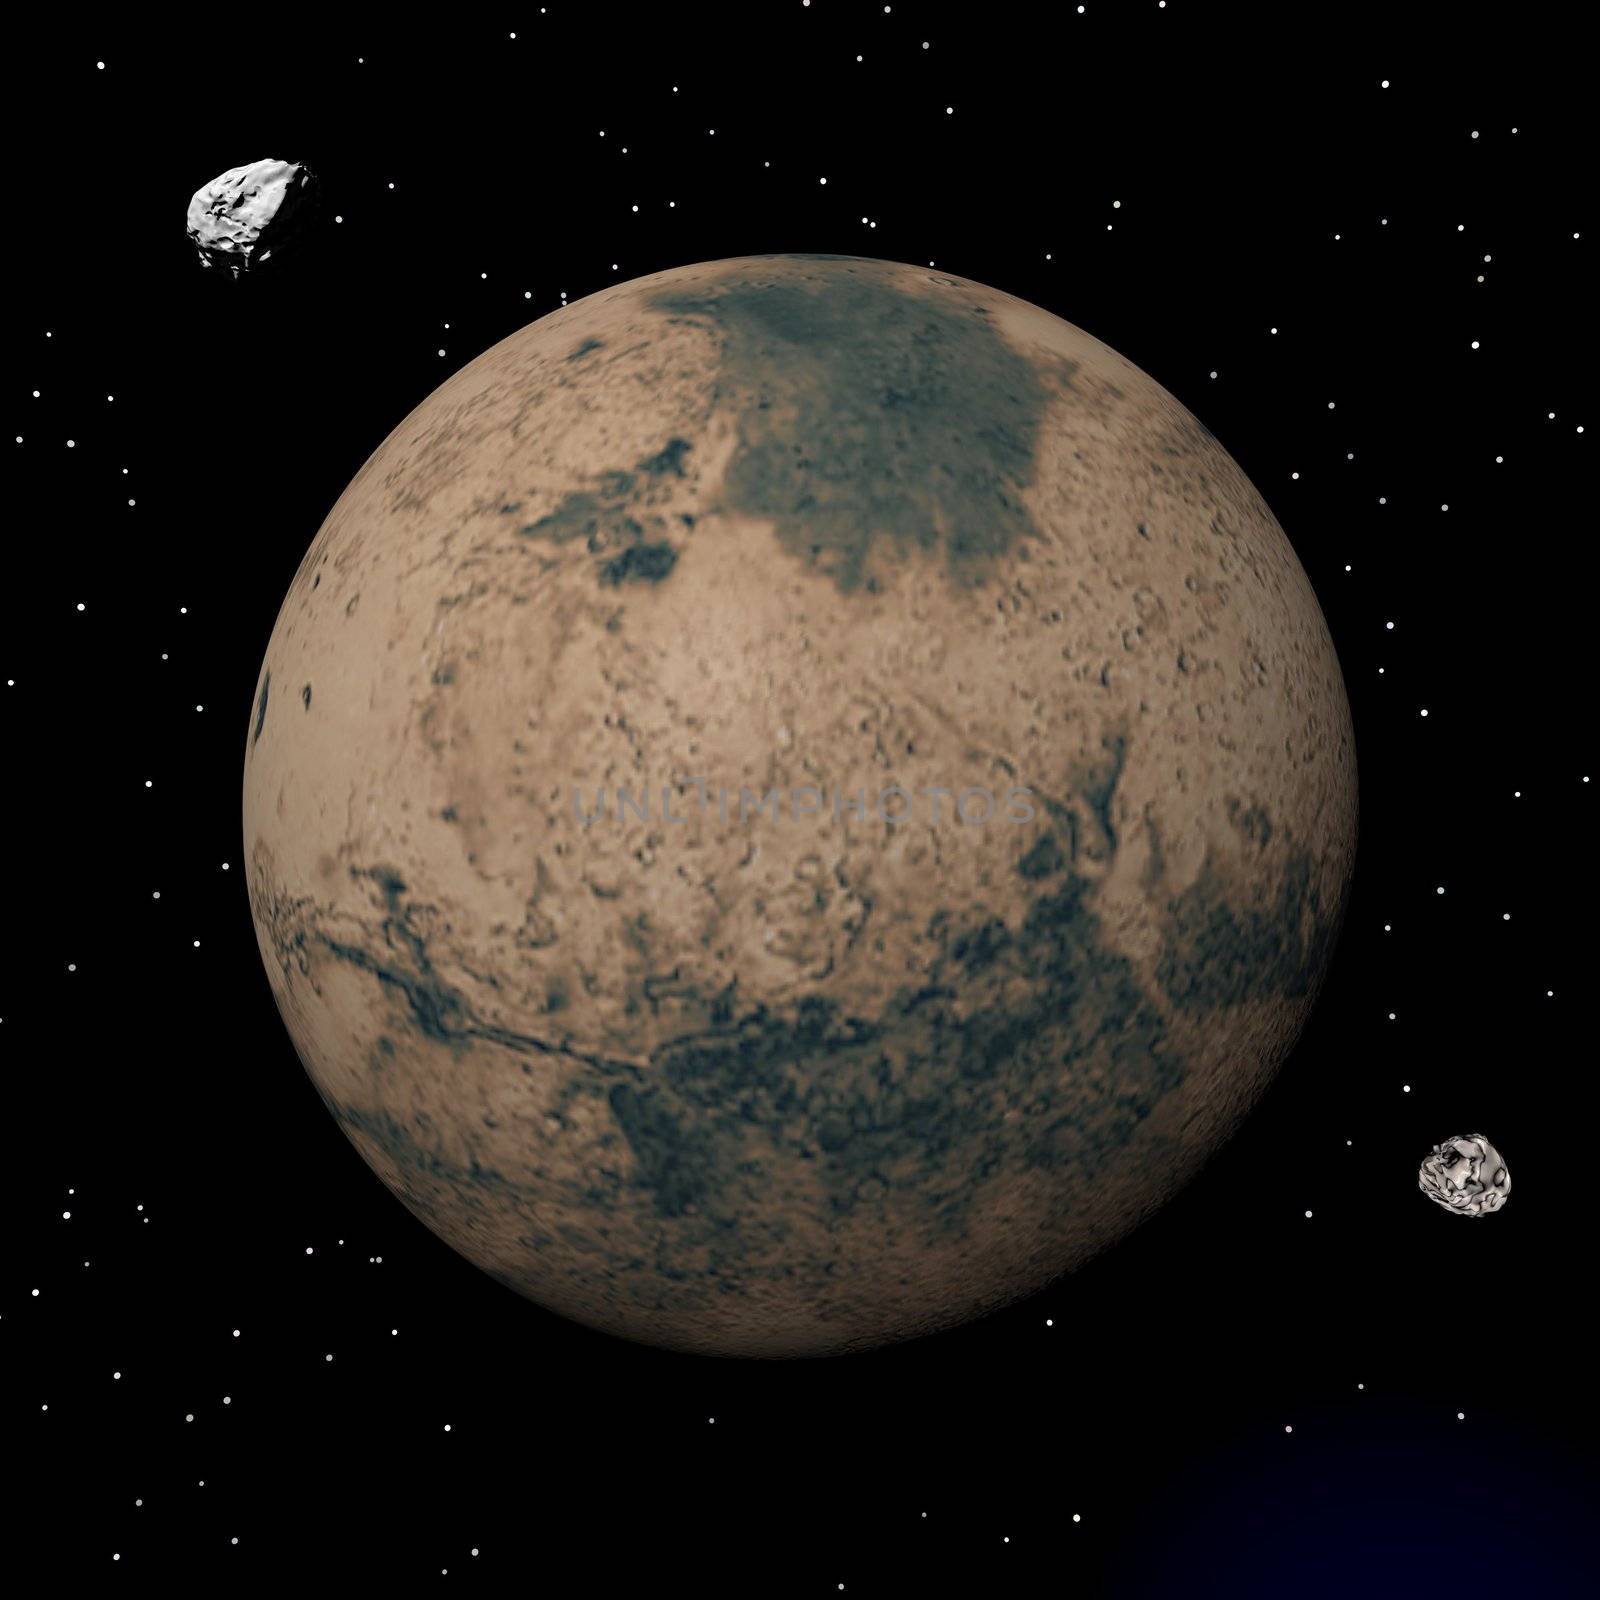 Mars planet and Deimos and Phobos satellites - 3D render by Elenaphotos21